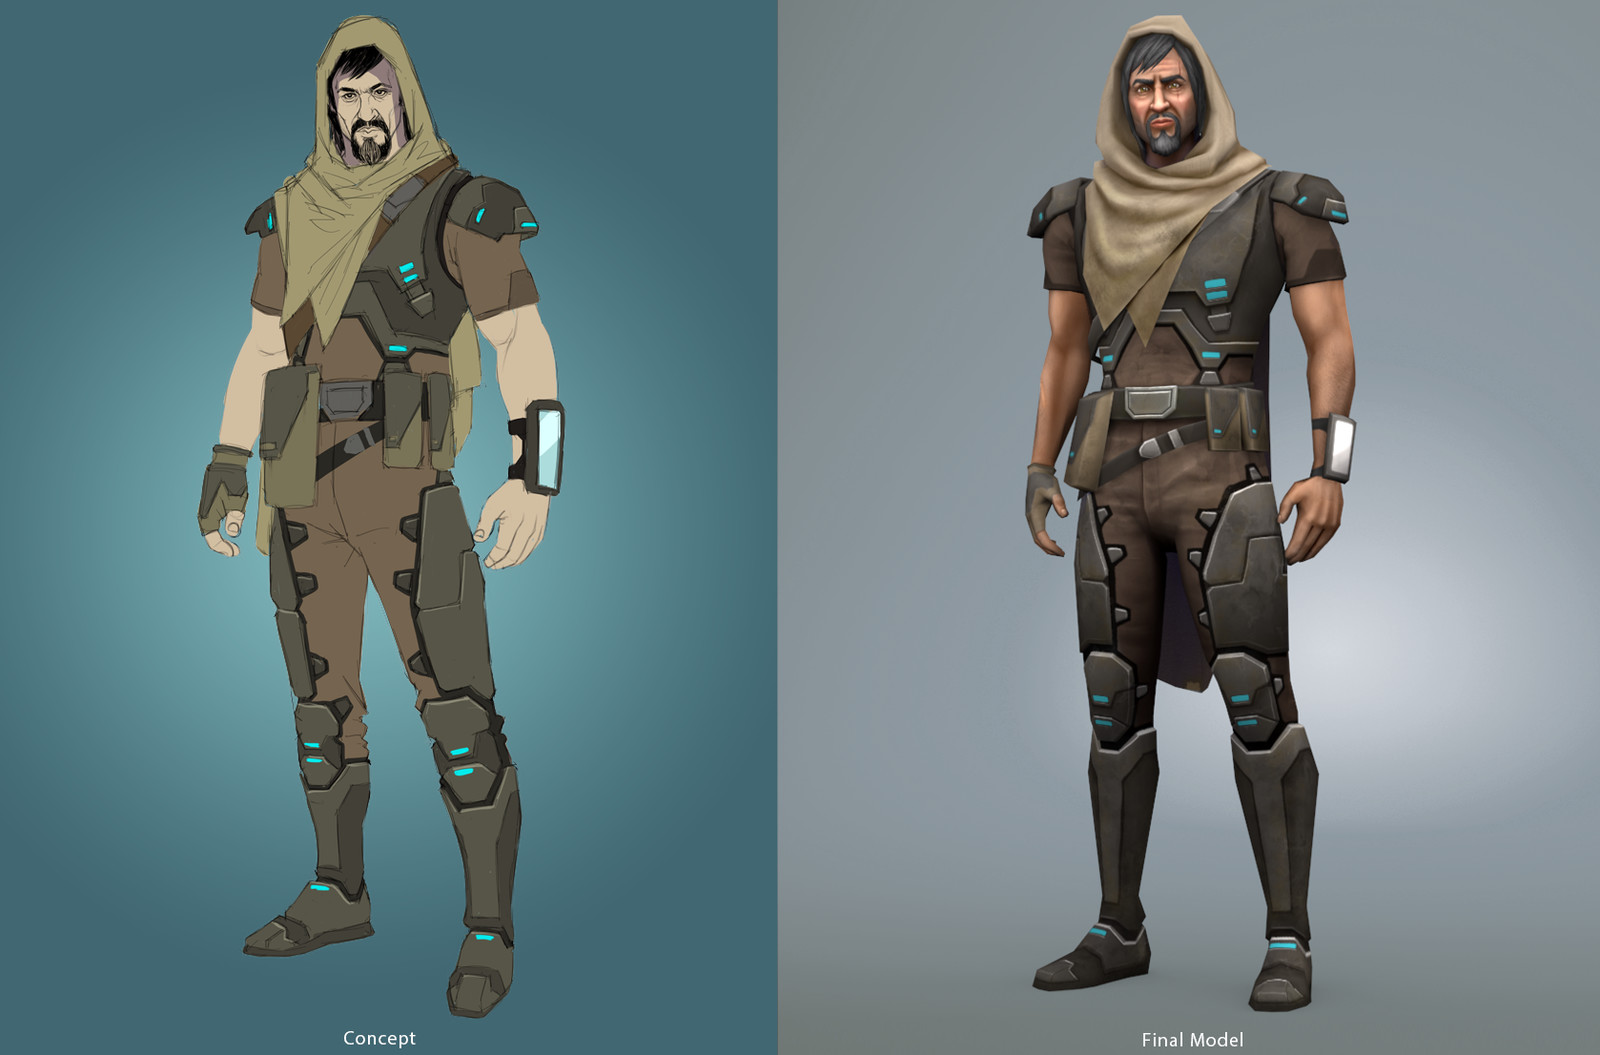 Concept art and final model.